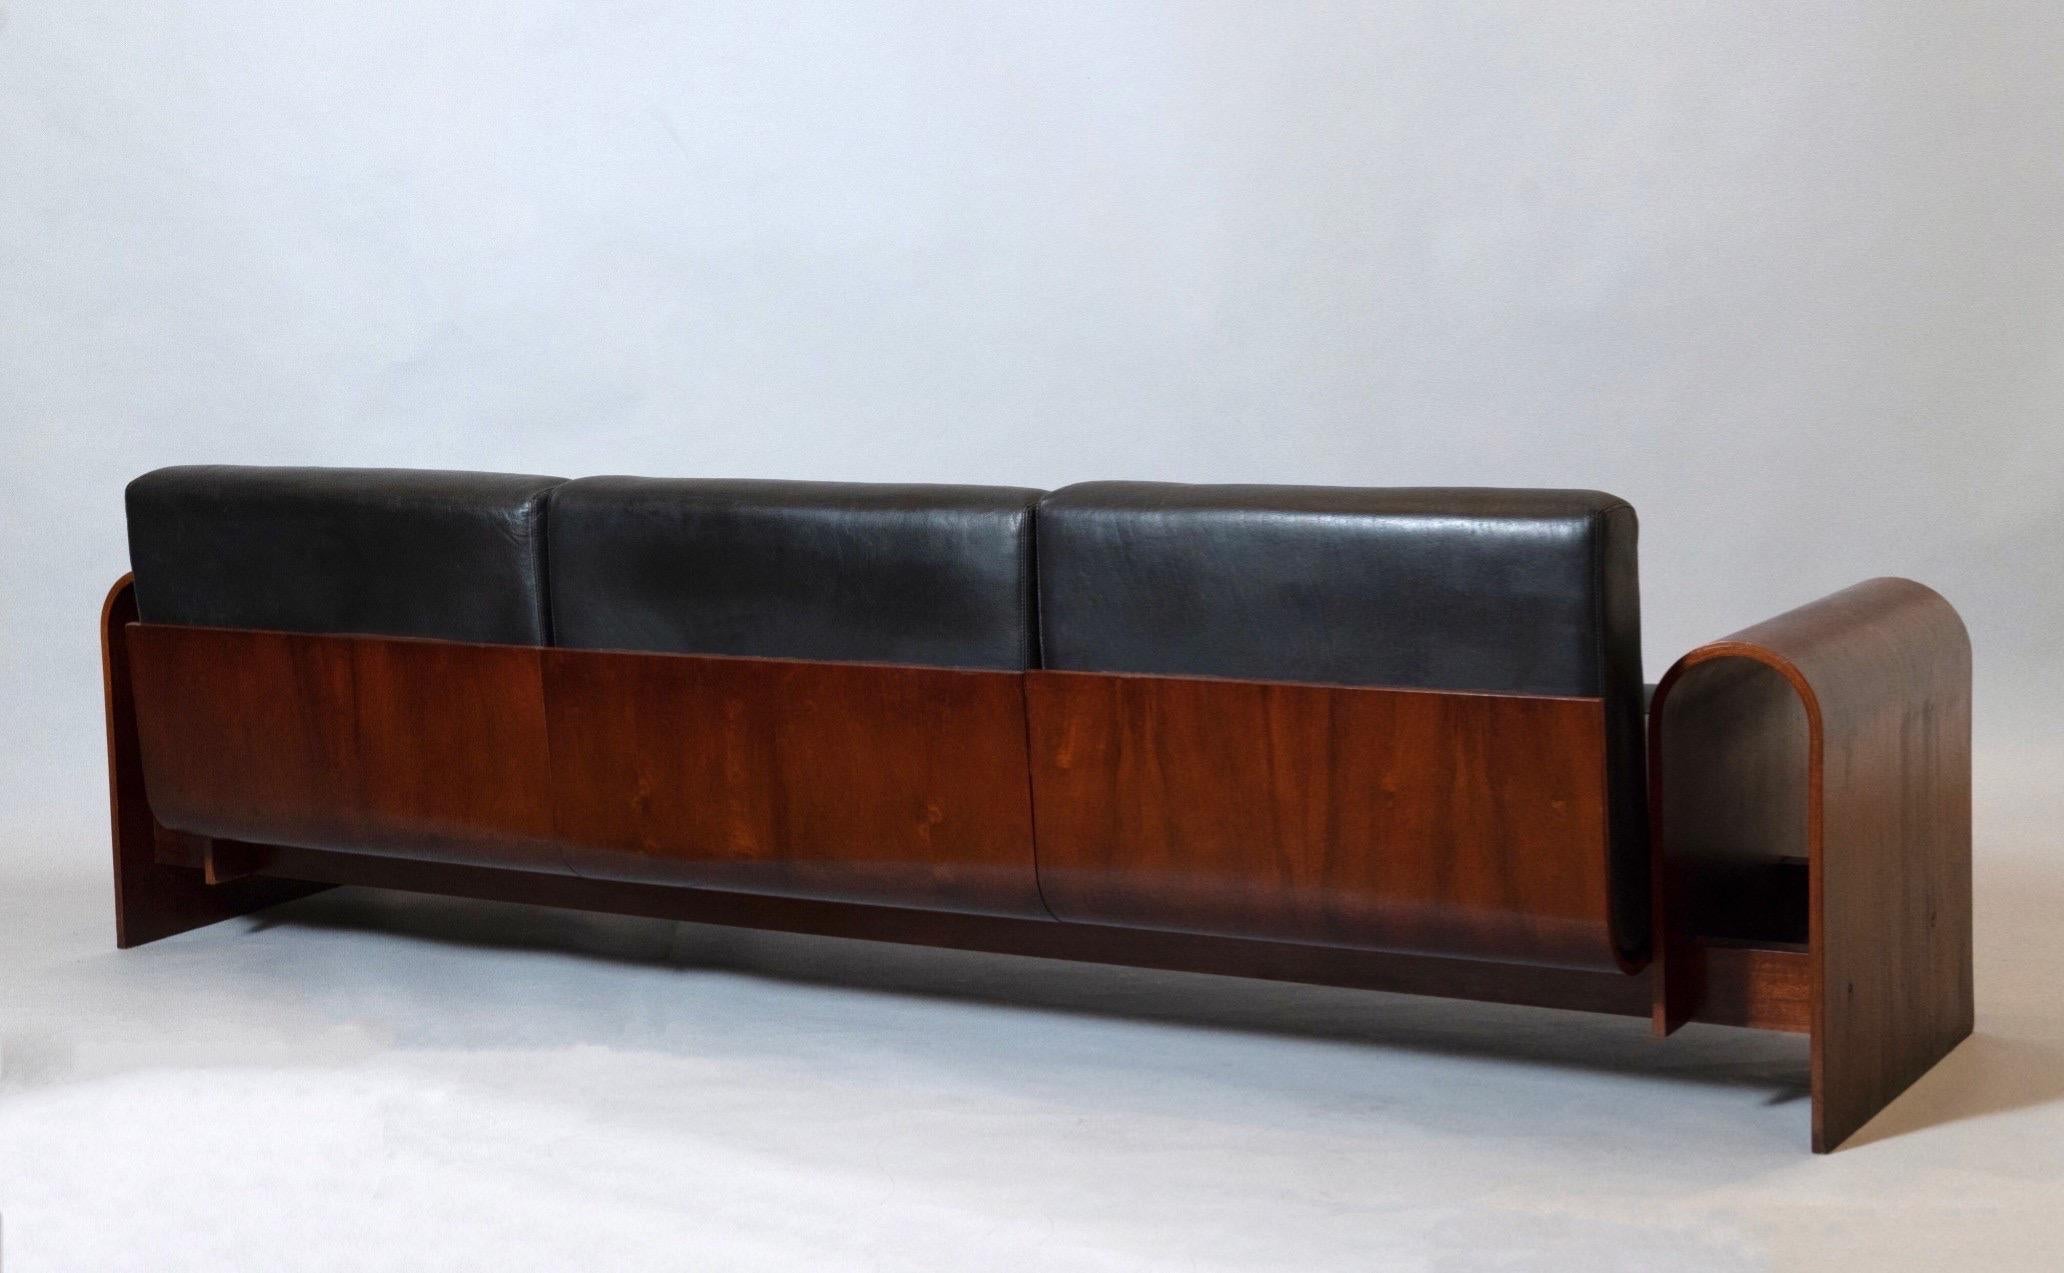 Oscar Niemeyer Exceptional Sofa in Rosewood and Leather, Hotel SESC, Brazil 1990 For Sale 1